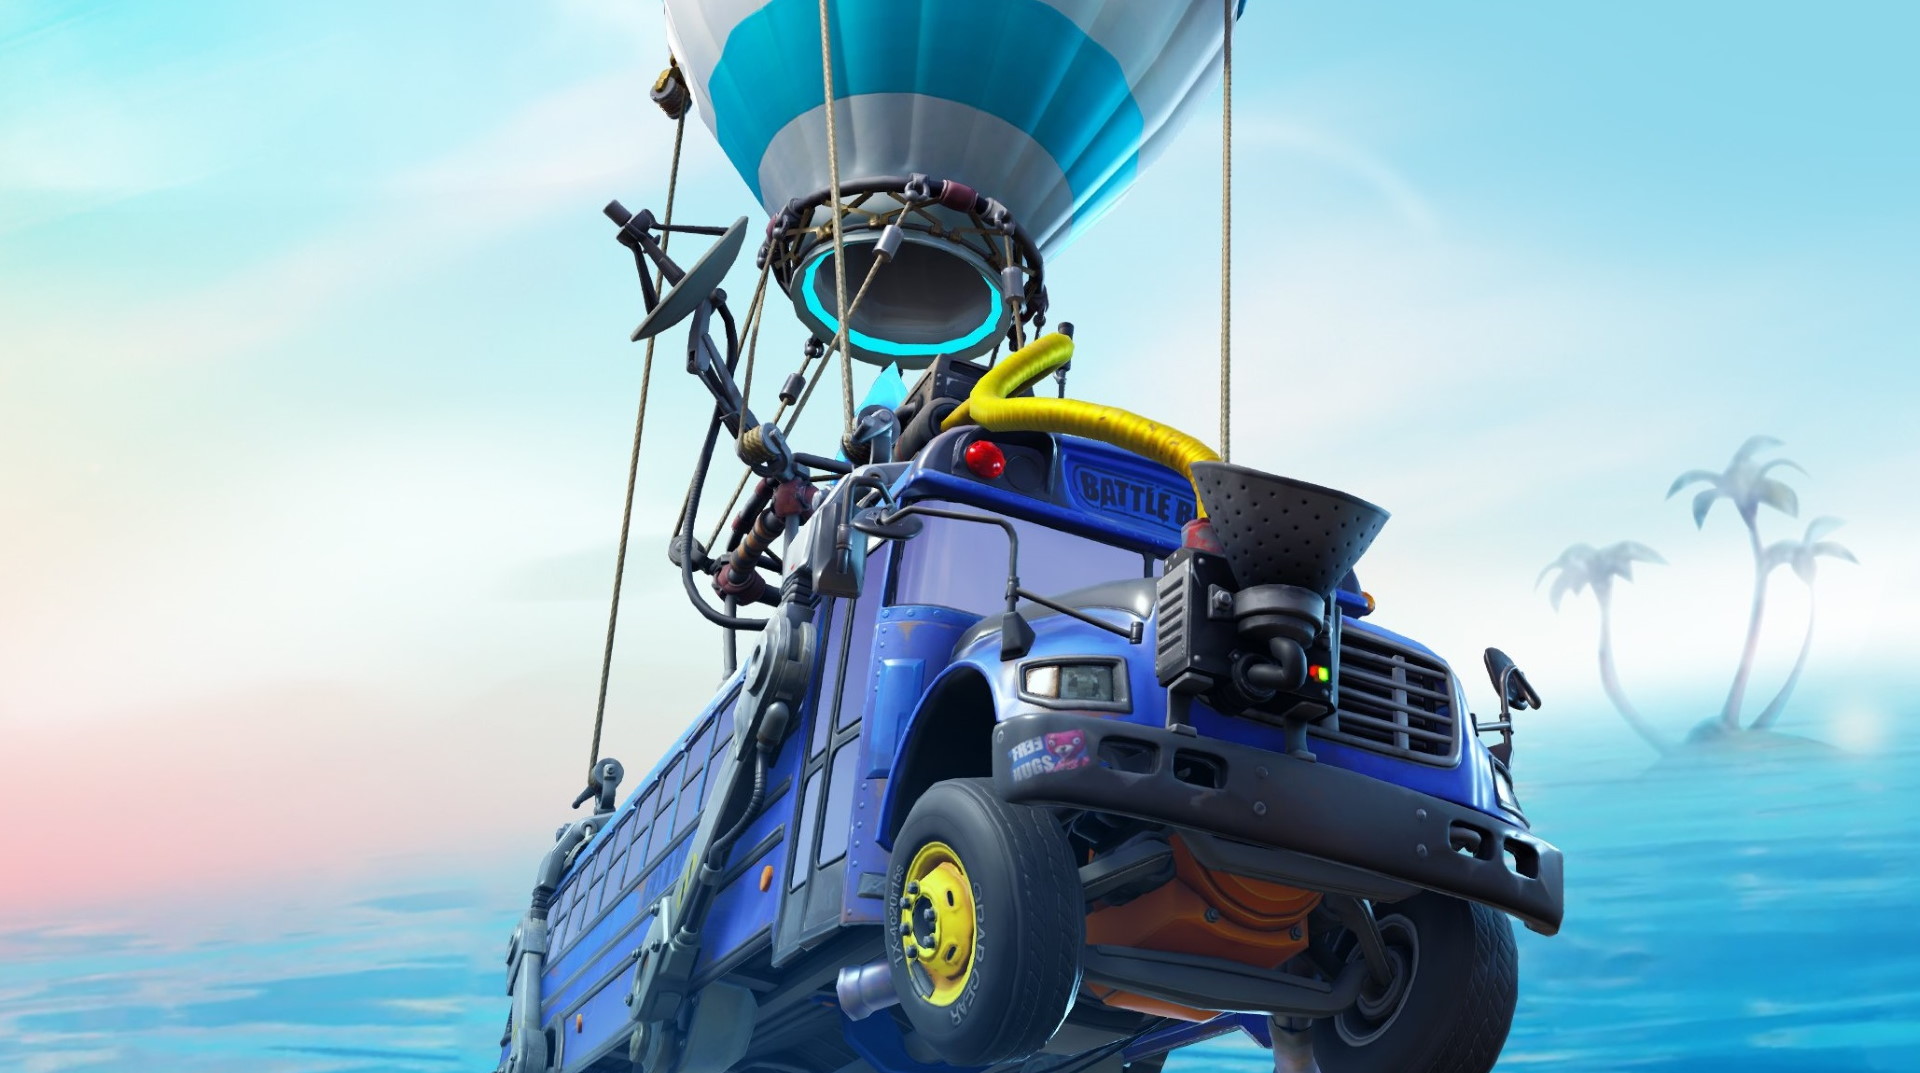 Fortnite Season 3 and 'The Device' live event have been postponed